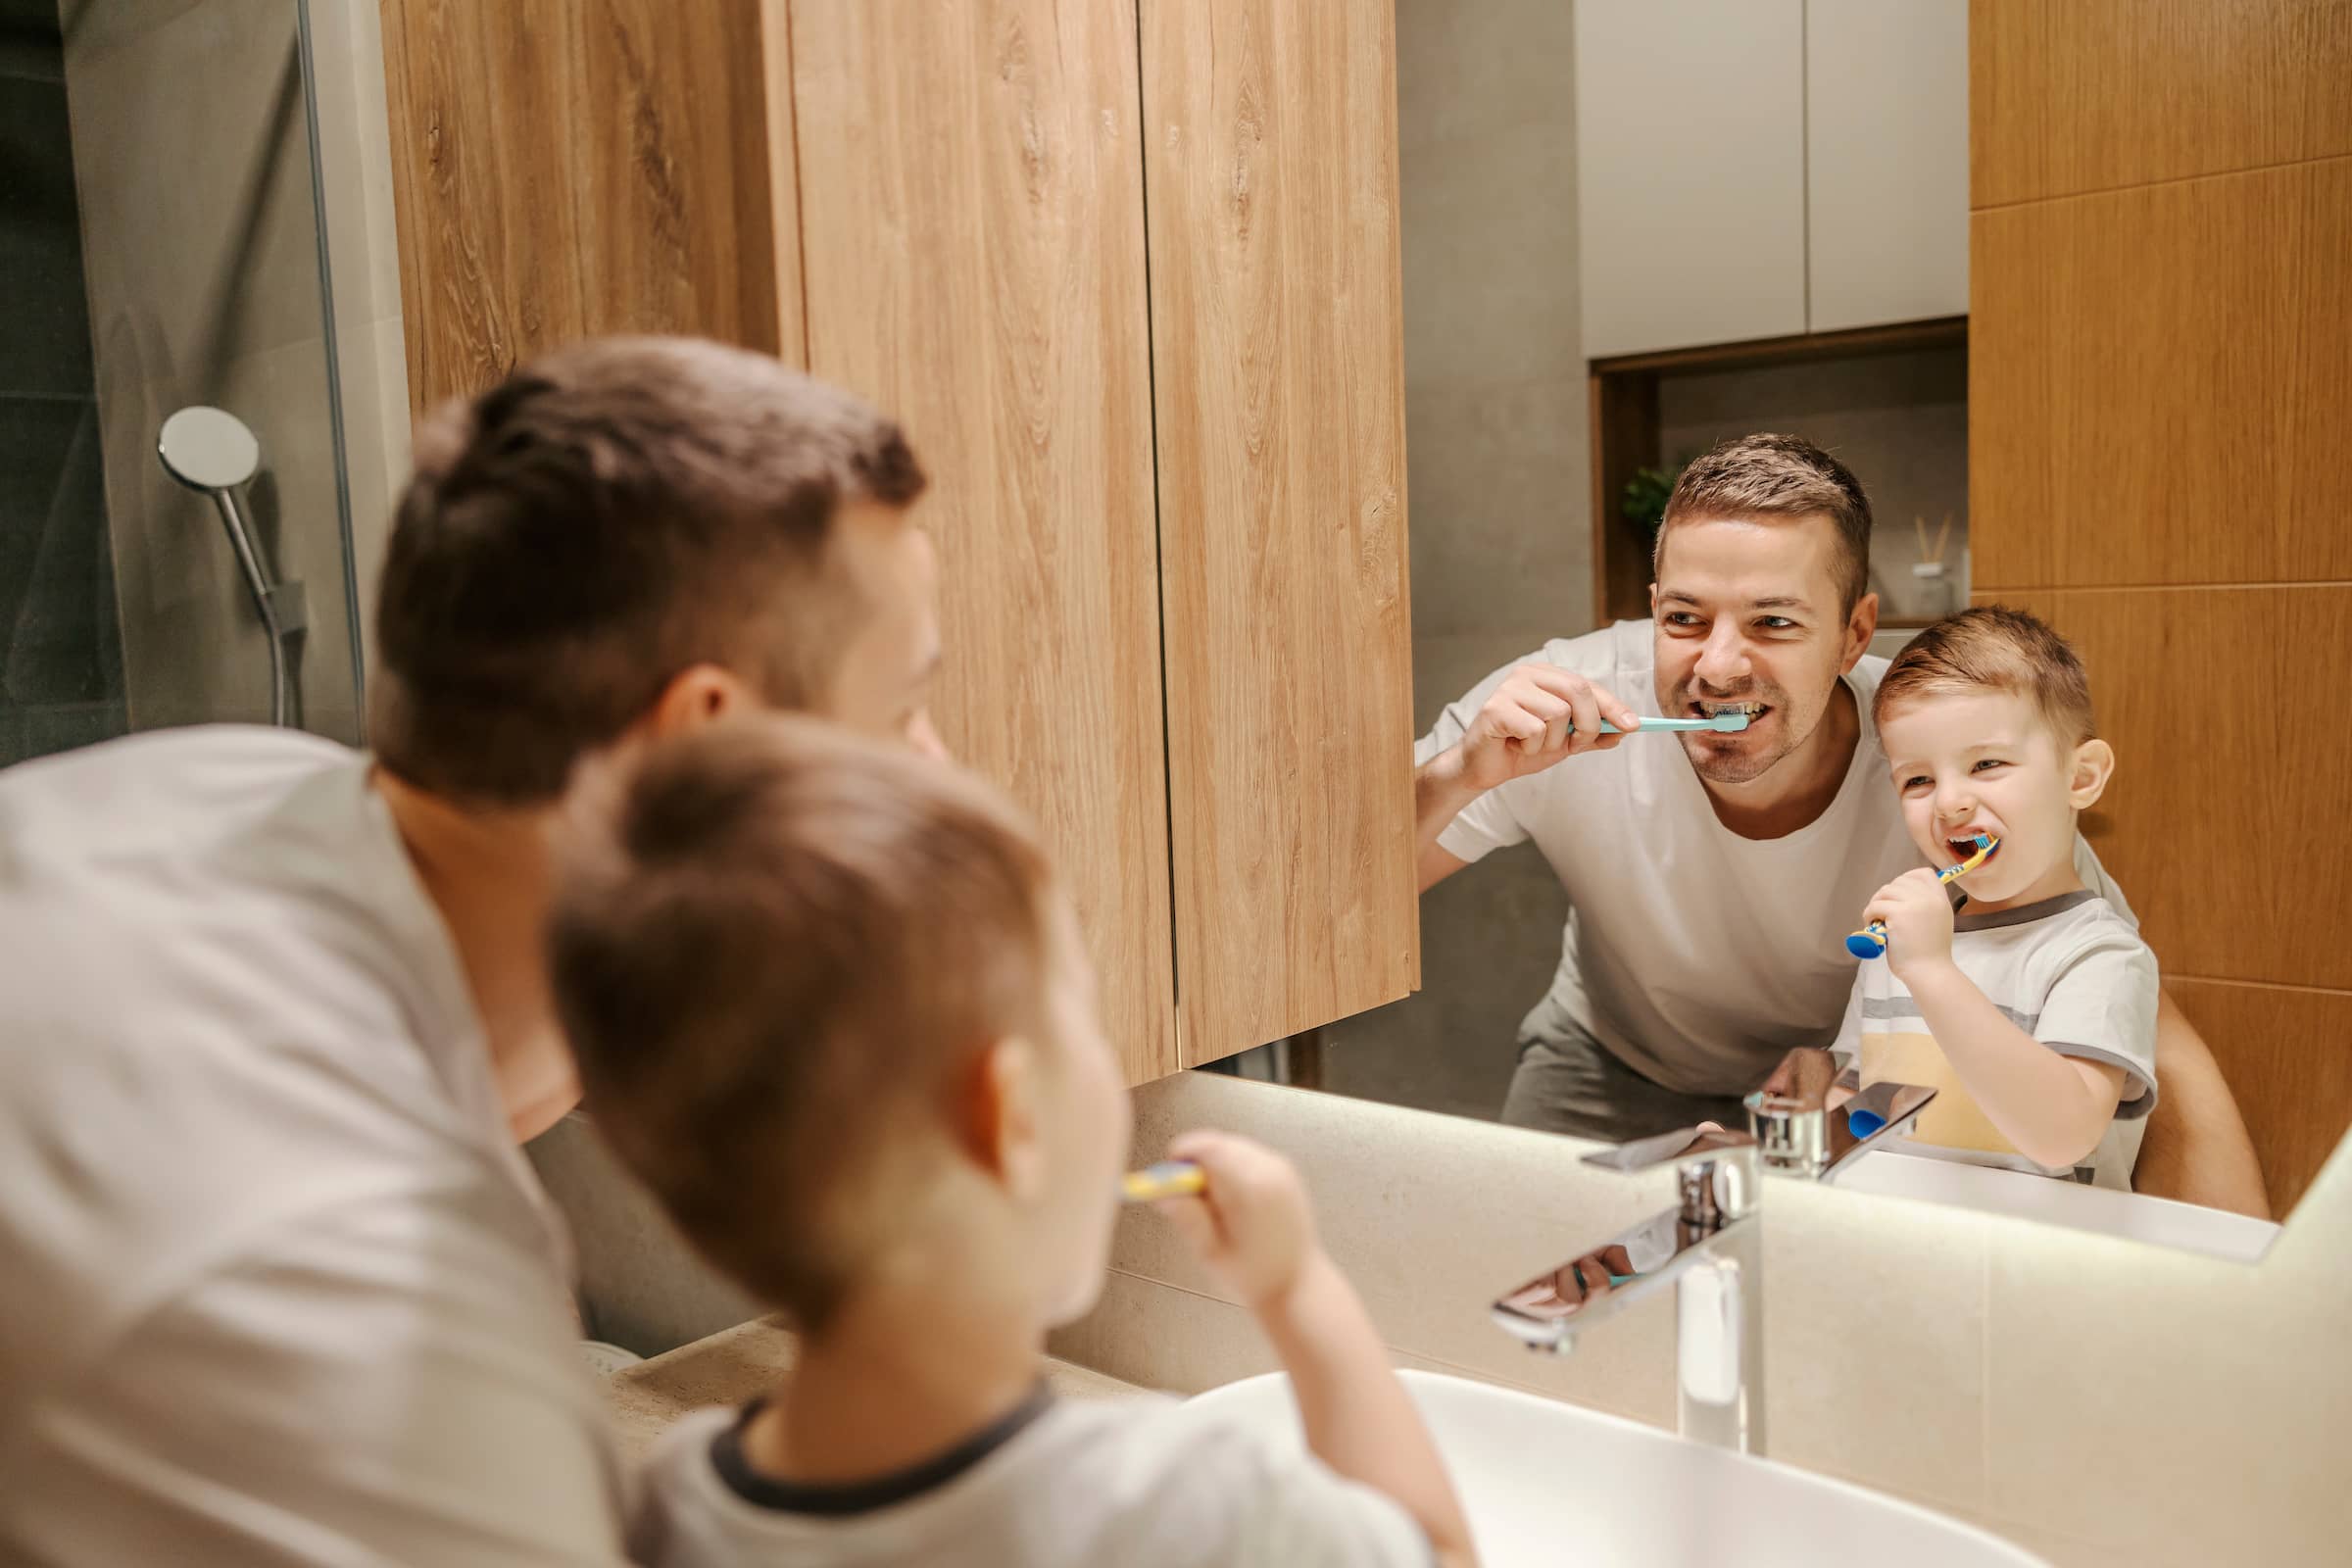 Reflection of a father and a little boy brushing their teeth in a bathroom.